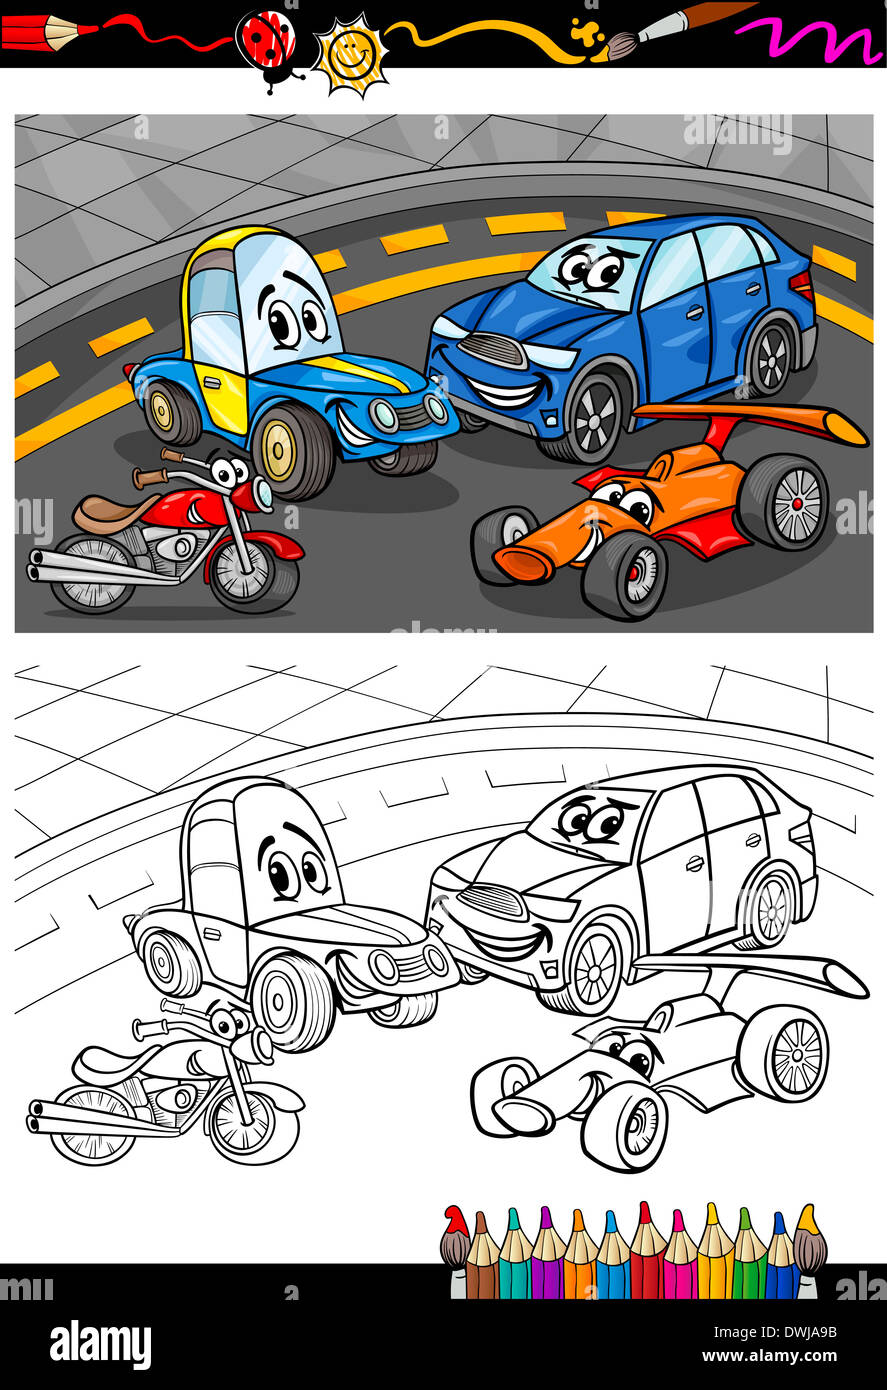 Coloring Book or Page Cartoon Illustration of Funny Cars and Vehicles Comic Characters for Children Stock Photo